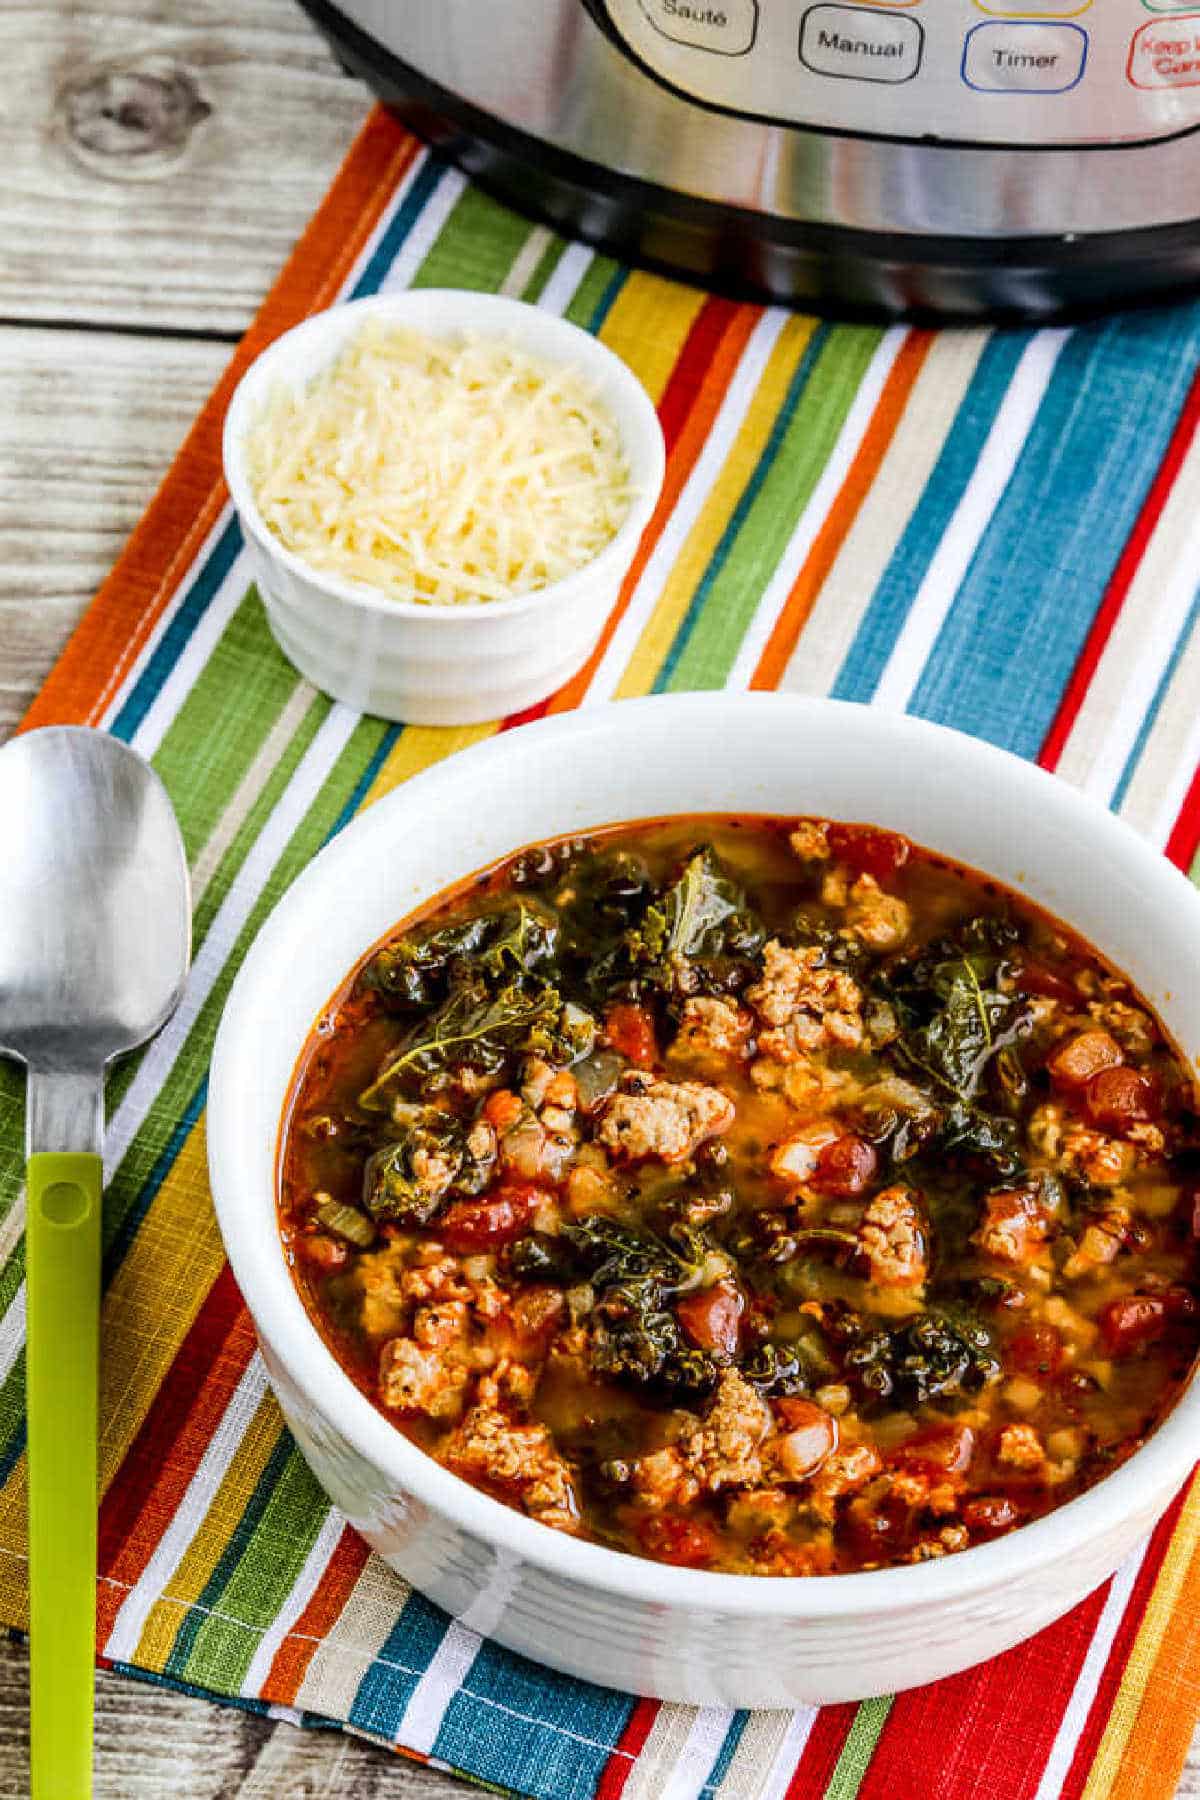 Instant Pot Sausage and Kale Soup shown in a serving bowl with Parmesan cheese and the Instant Pot in the background